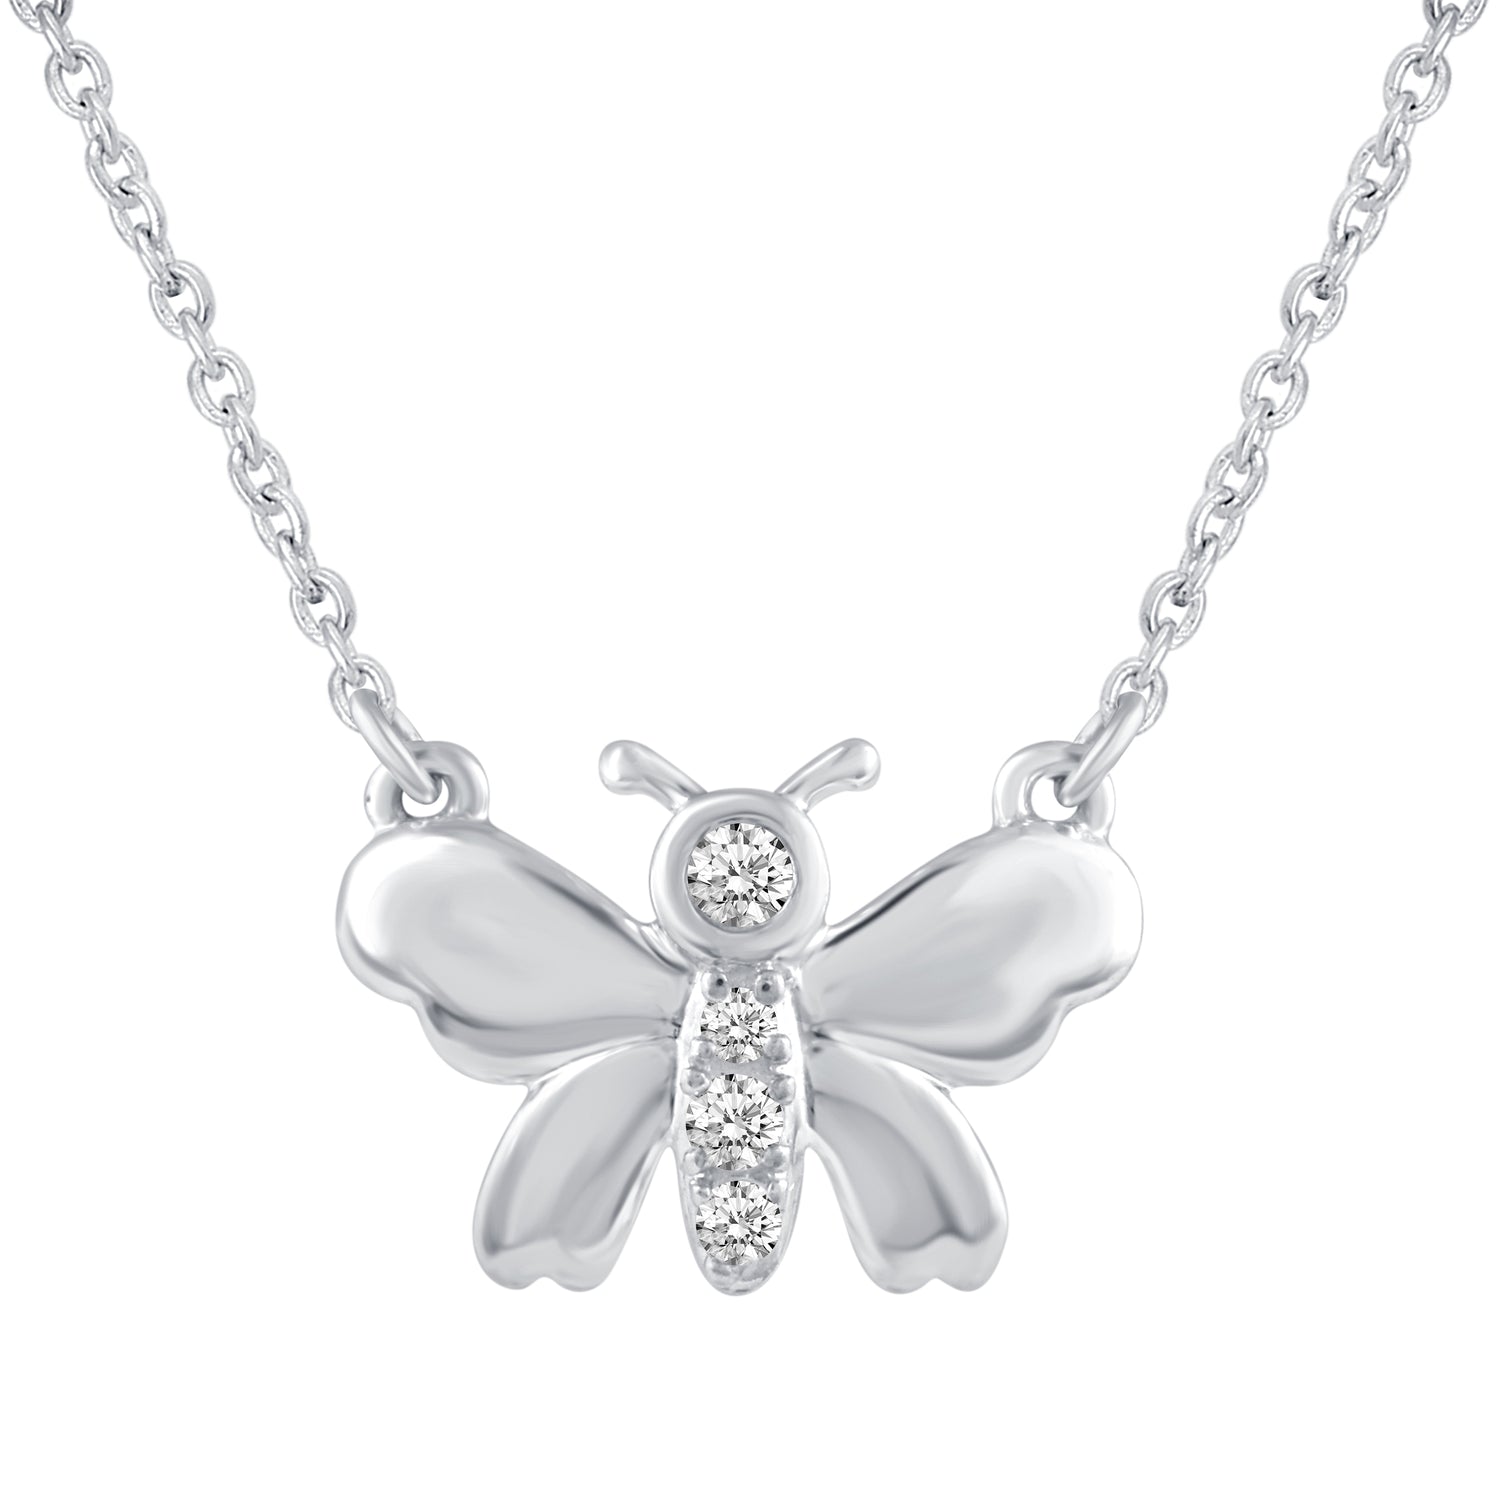 Dainty Butterfly 1/20 Cttw Natural Diamond Pendant Necklace set in 925 Sterling Silver jewelry gift